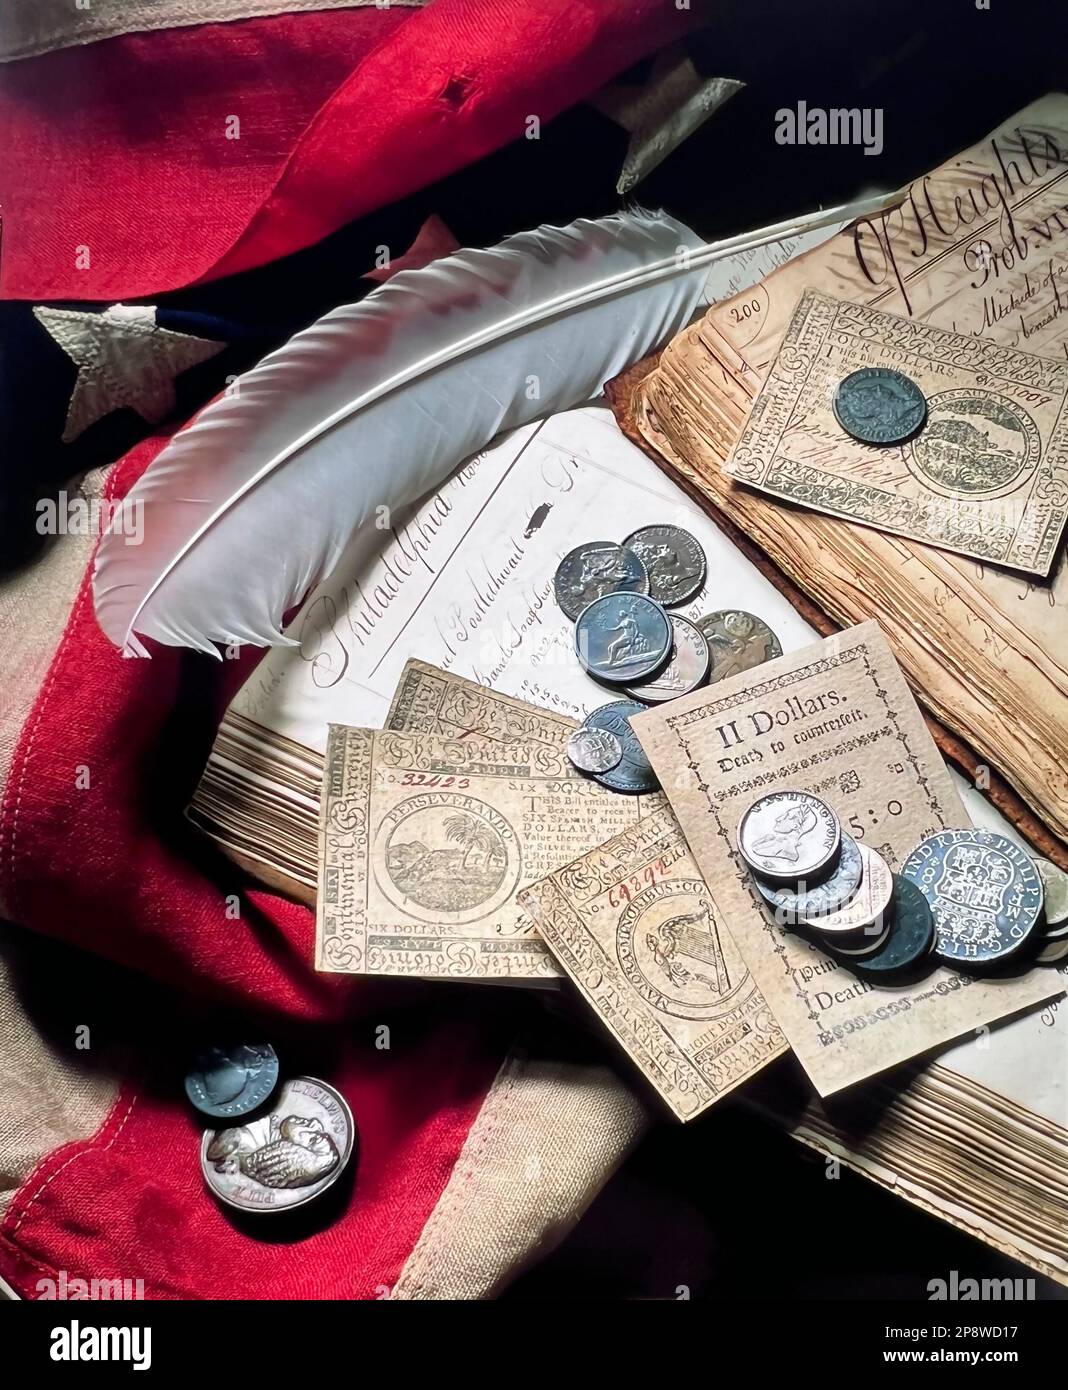 Still Iife photograph of colonial American coins and bank notes Stock Photo